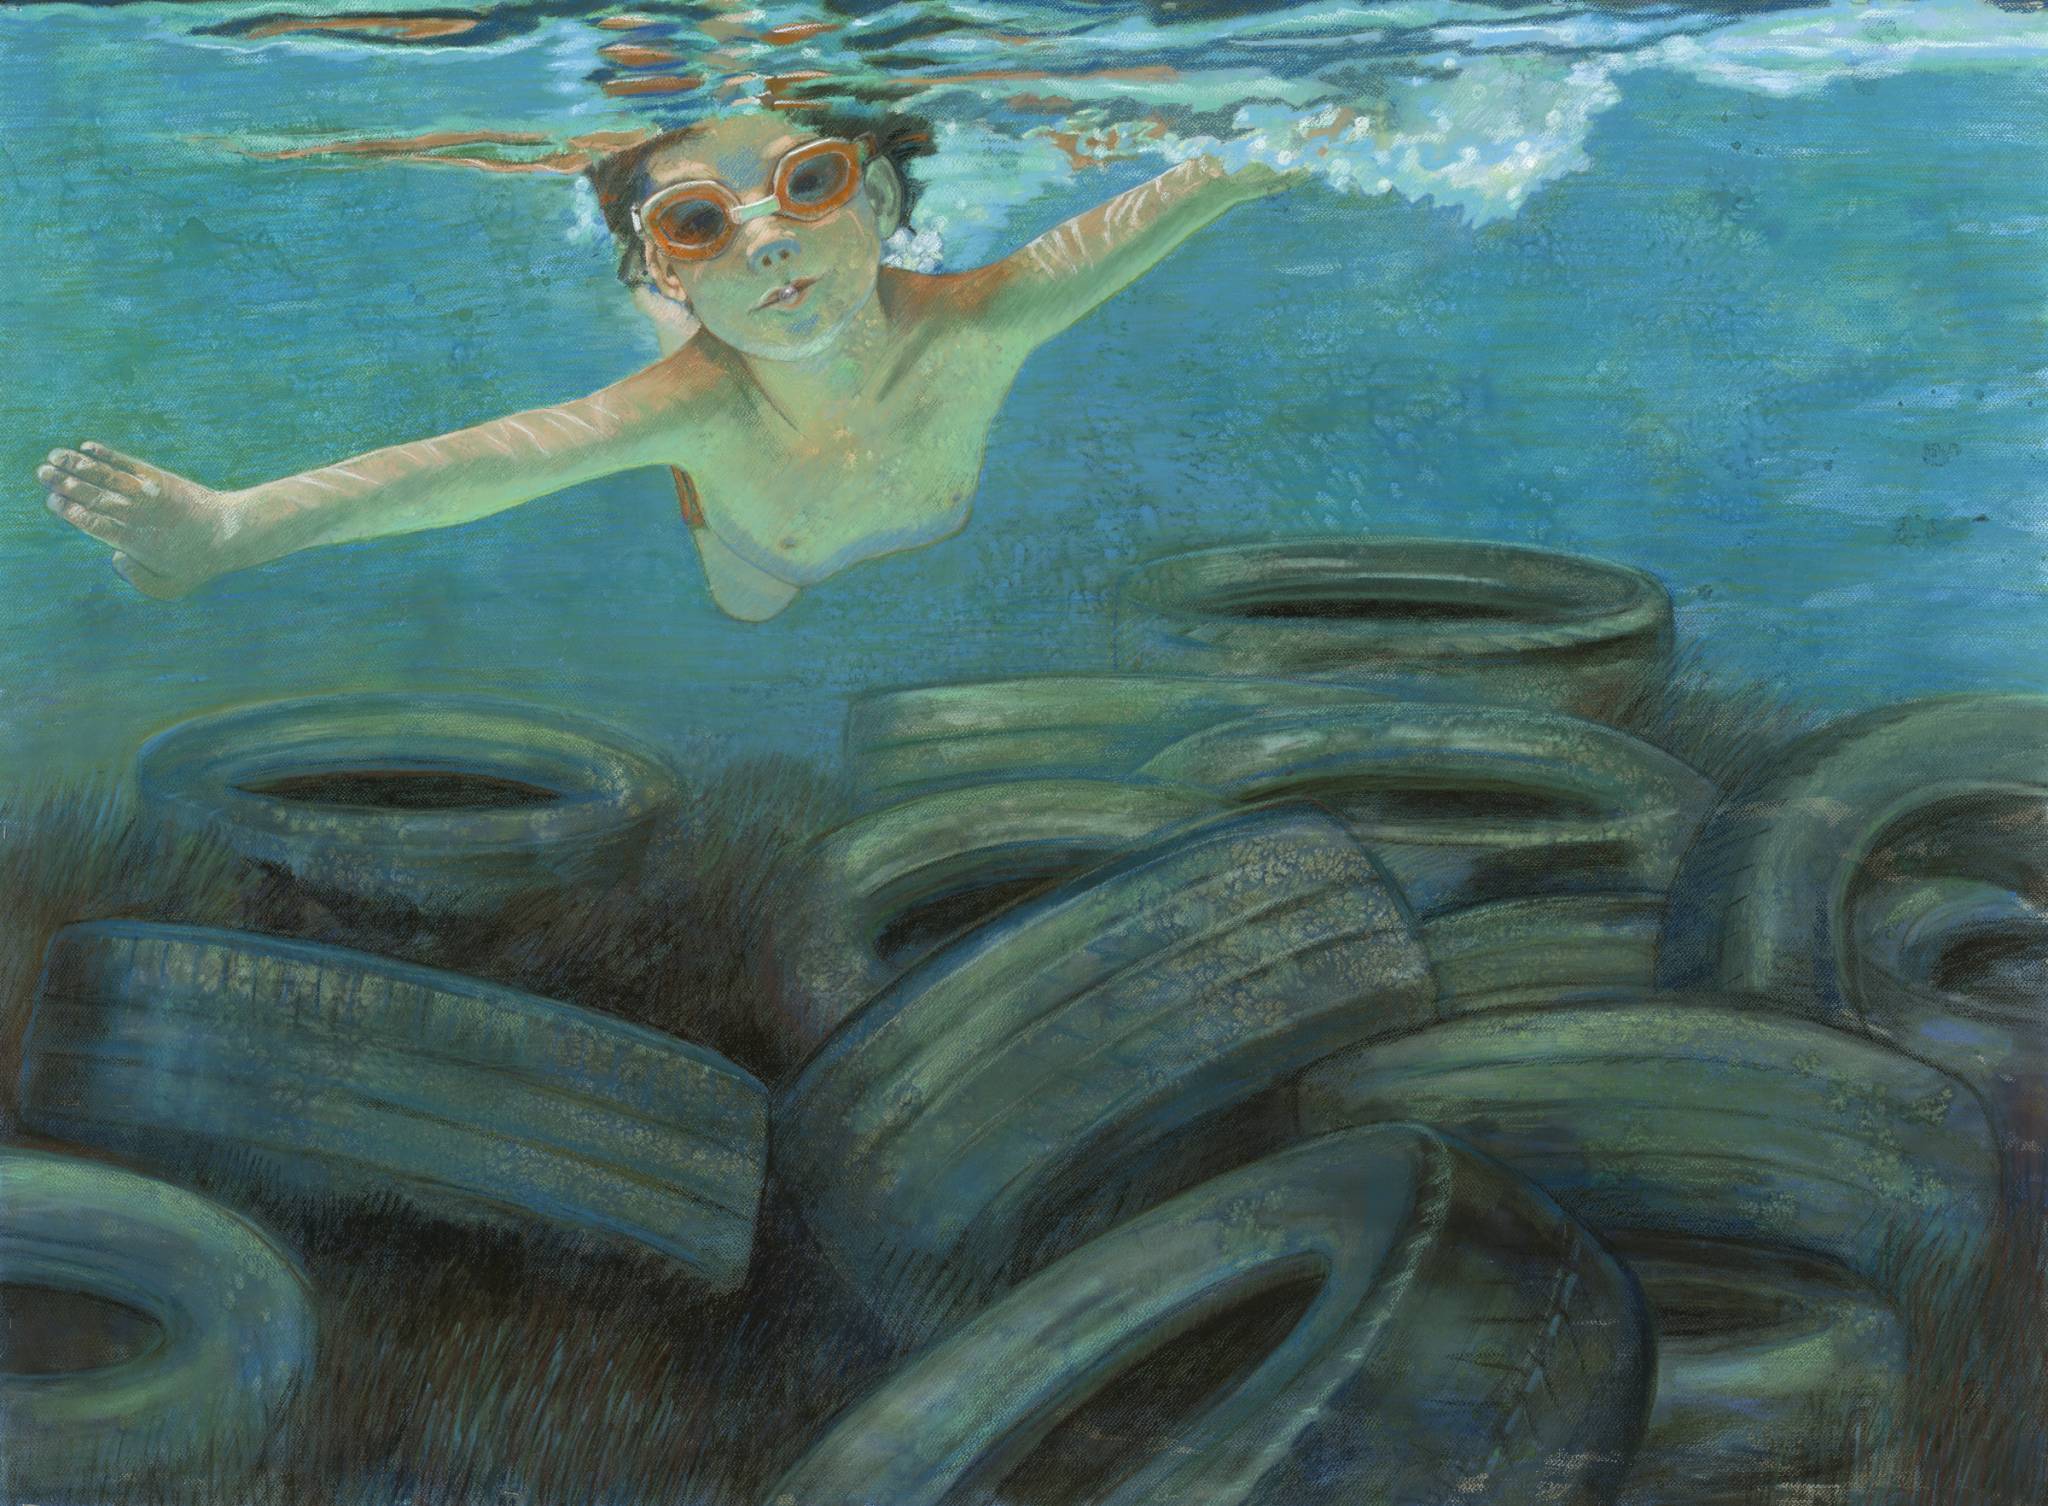 Swimming with Tires